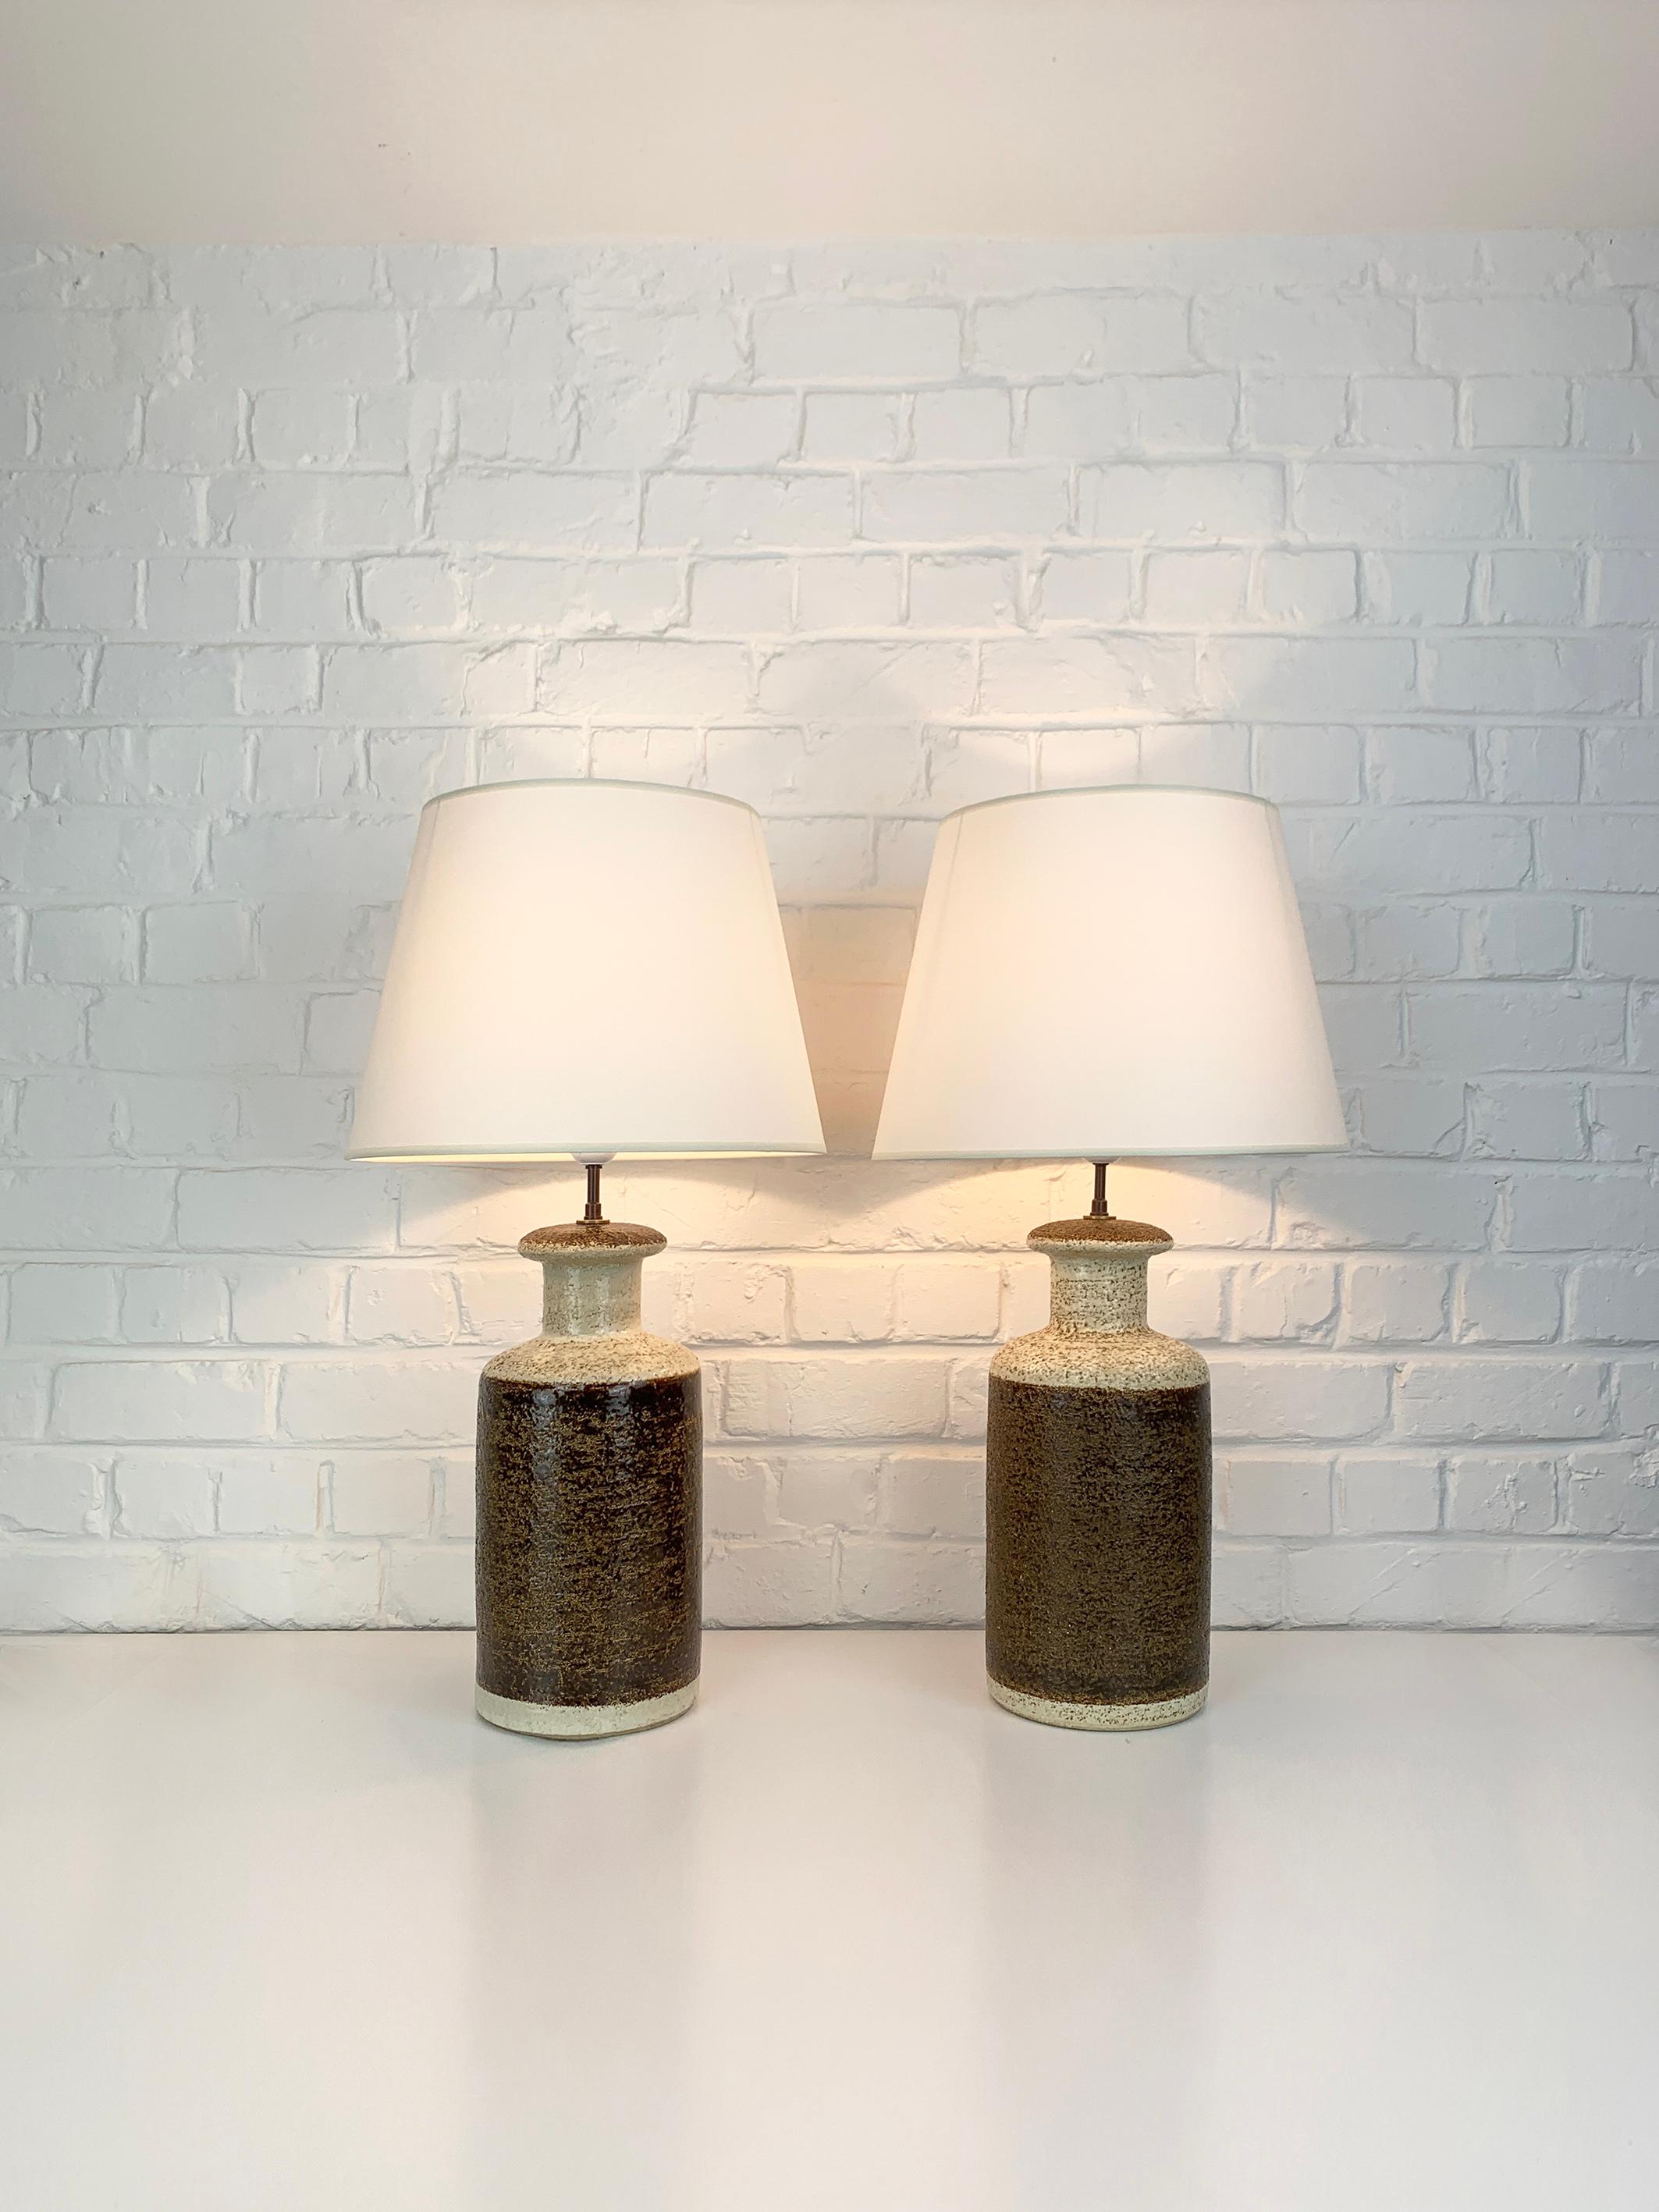 Pair of Danish Mid-Century stoneware table lamps of the 1970s, design by Svend Aage Jensen. 

Scuptural lamp bases made of chamotte clay with earth-tone glaze, chocolate brown and beige colors. These lamps exist in different sizes, here the biggest